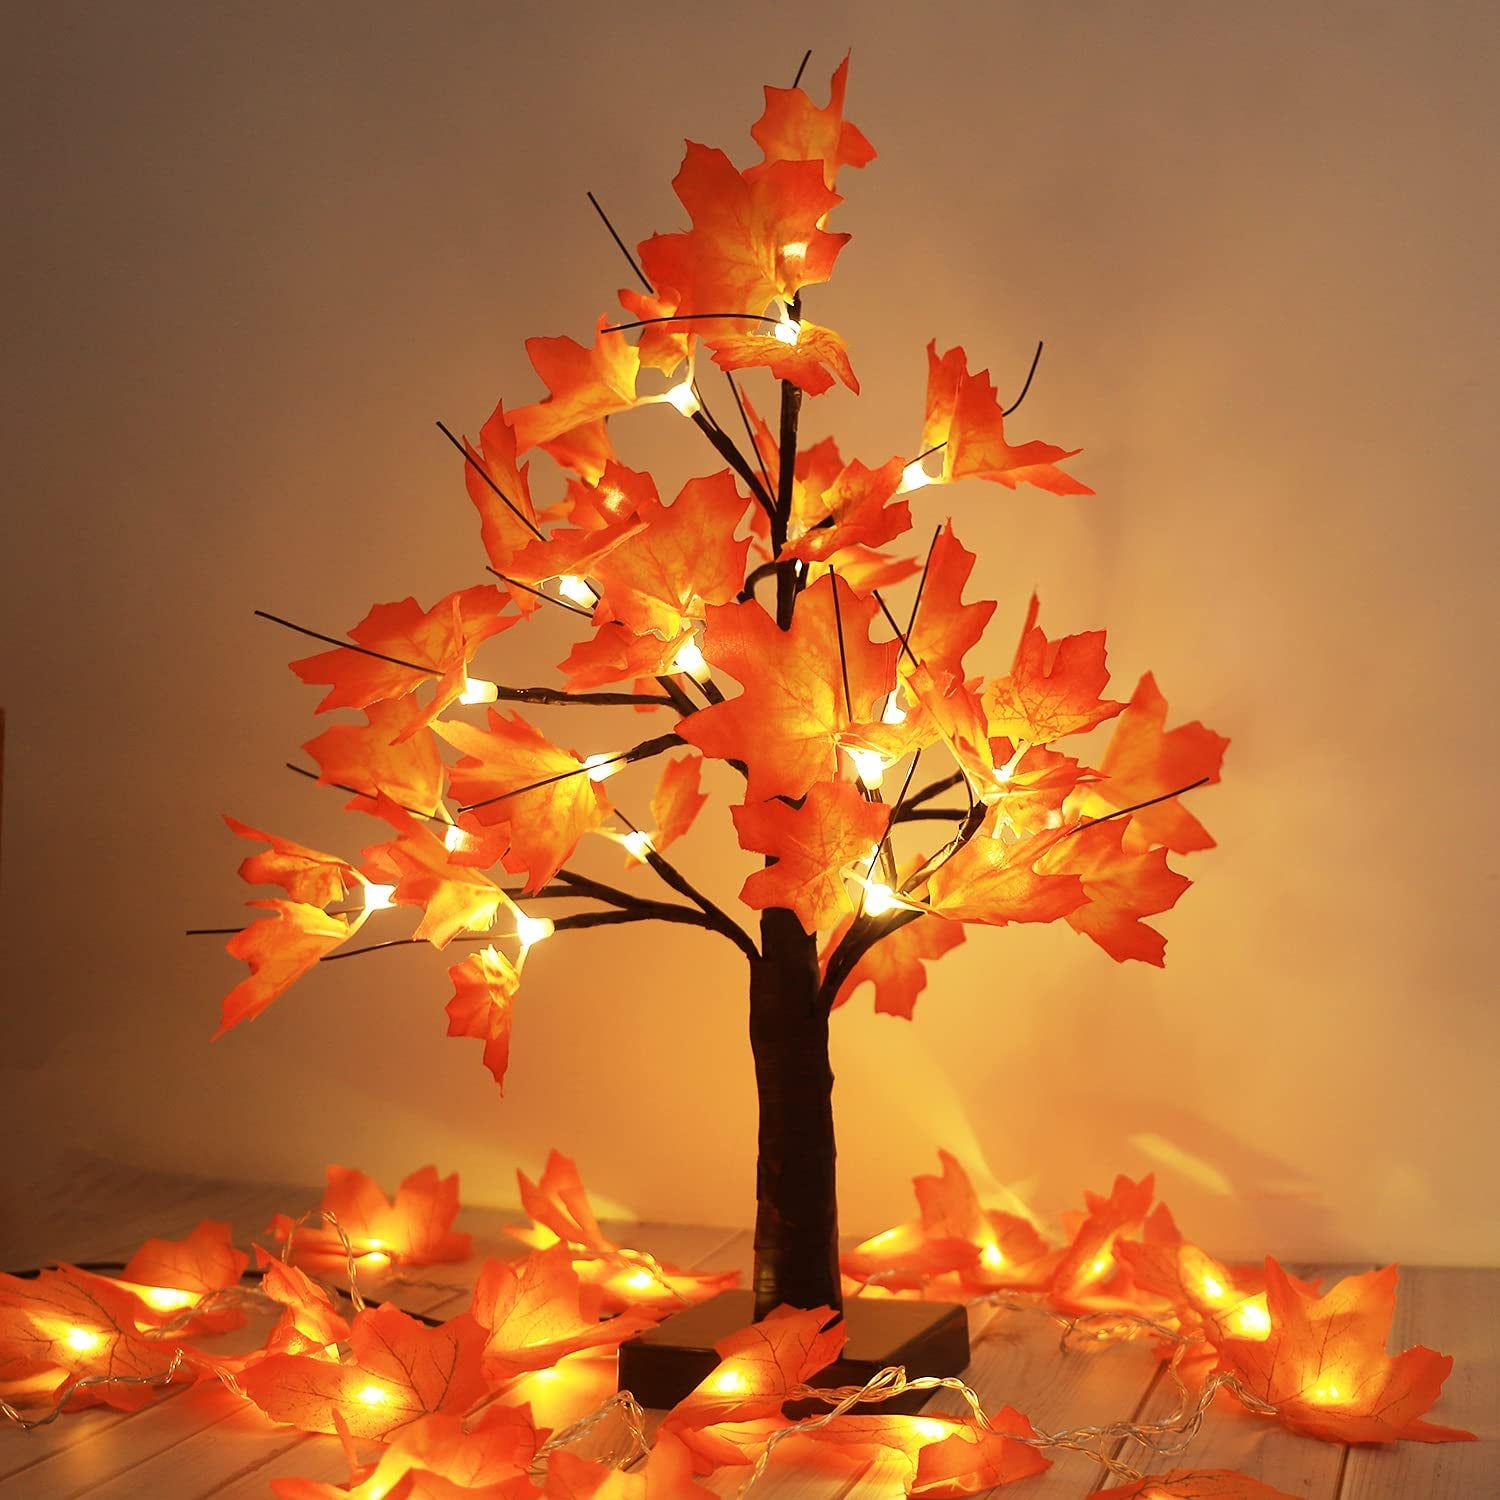 Lighted Maple Tree Thanksgiving Decorations, 24LED Tabletop Tree Lights Artificial Bonsai Tree Lamp Fall Centerpieces for Tables, Autumn Christmas, Halloween, Fall Decor for Home Warm White